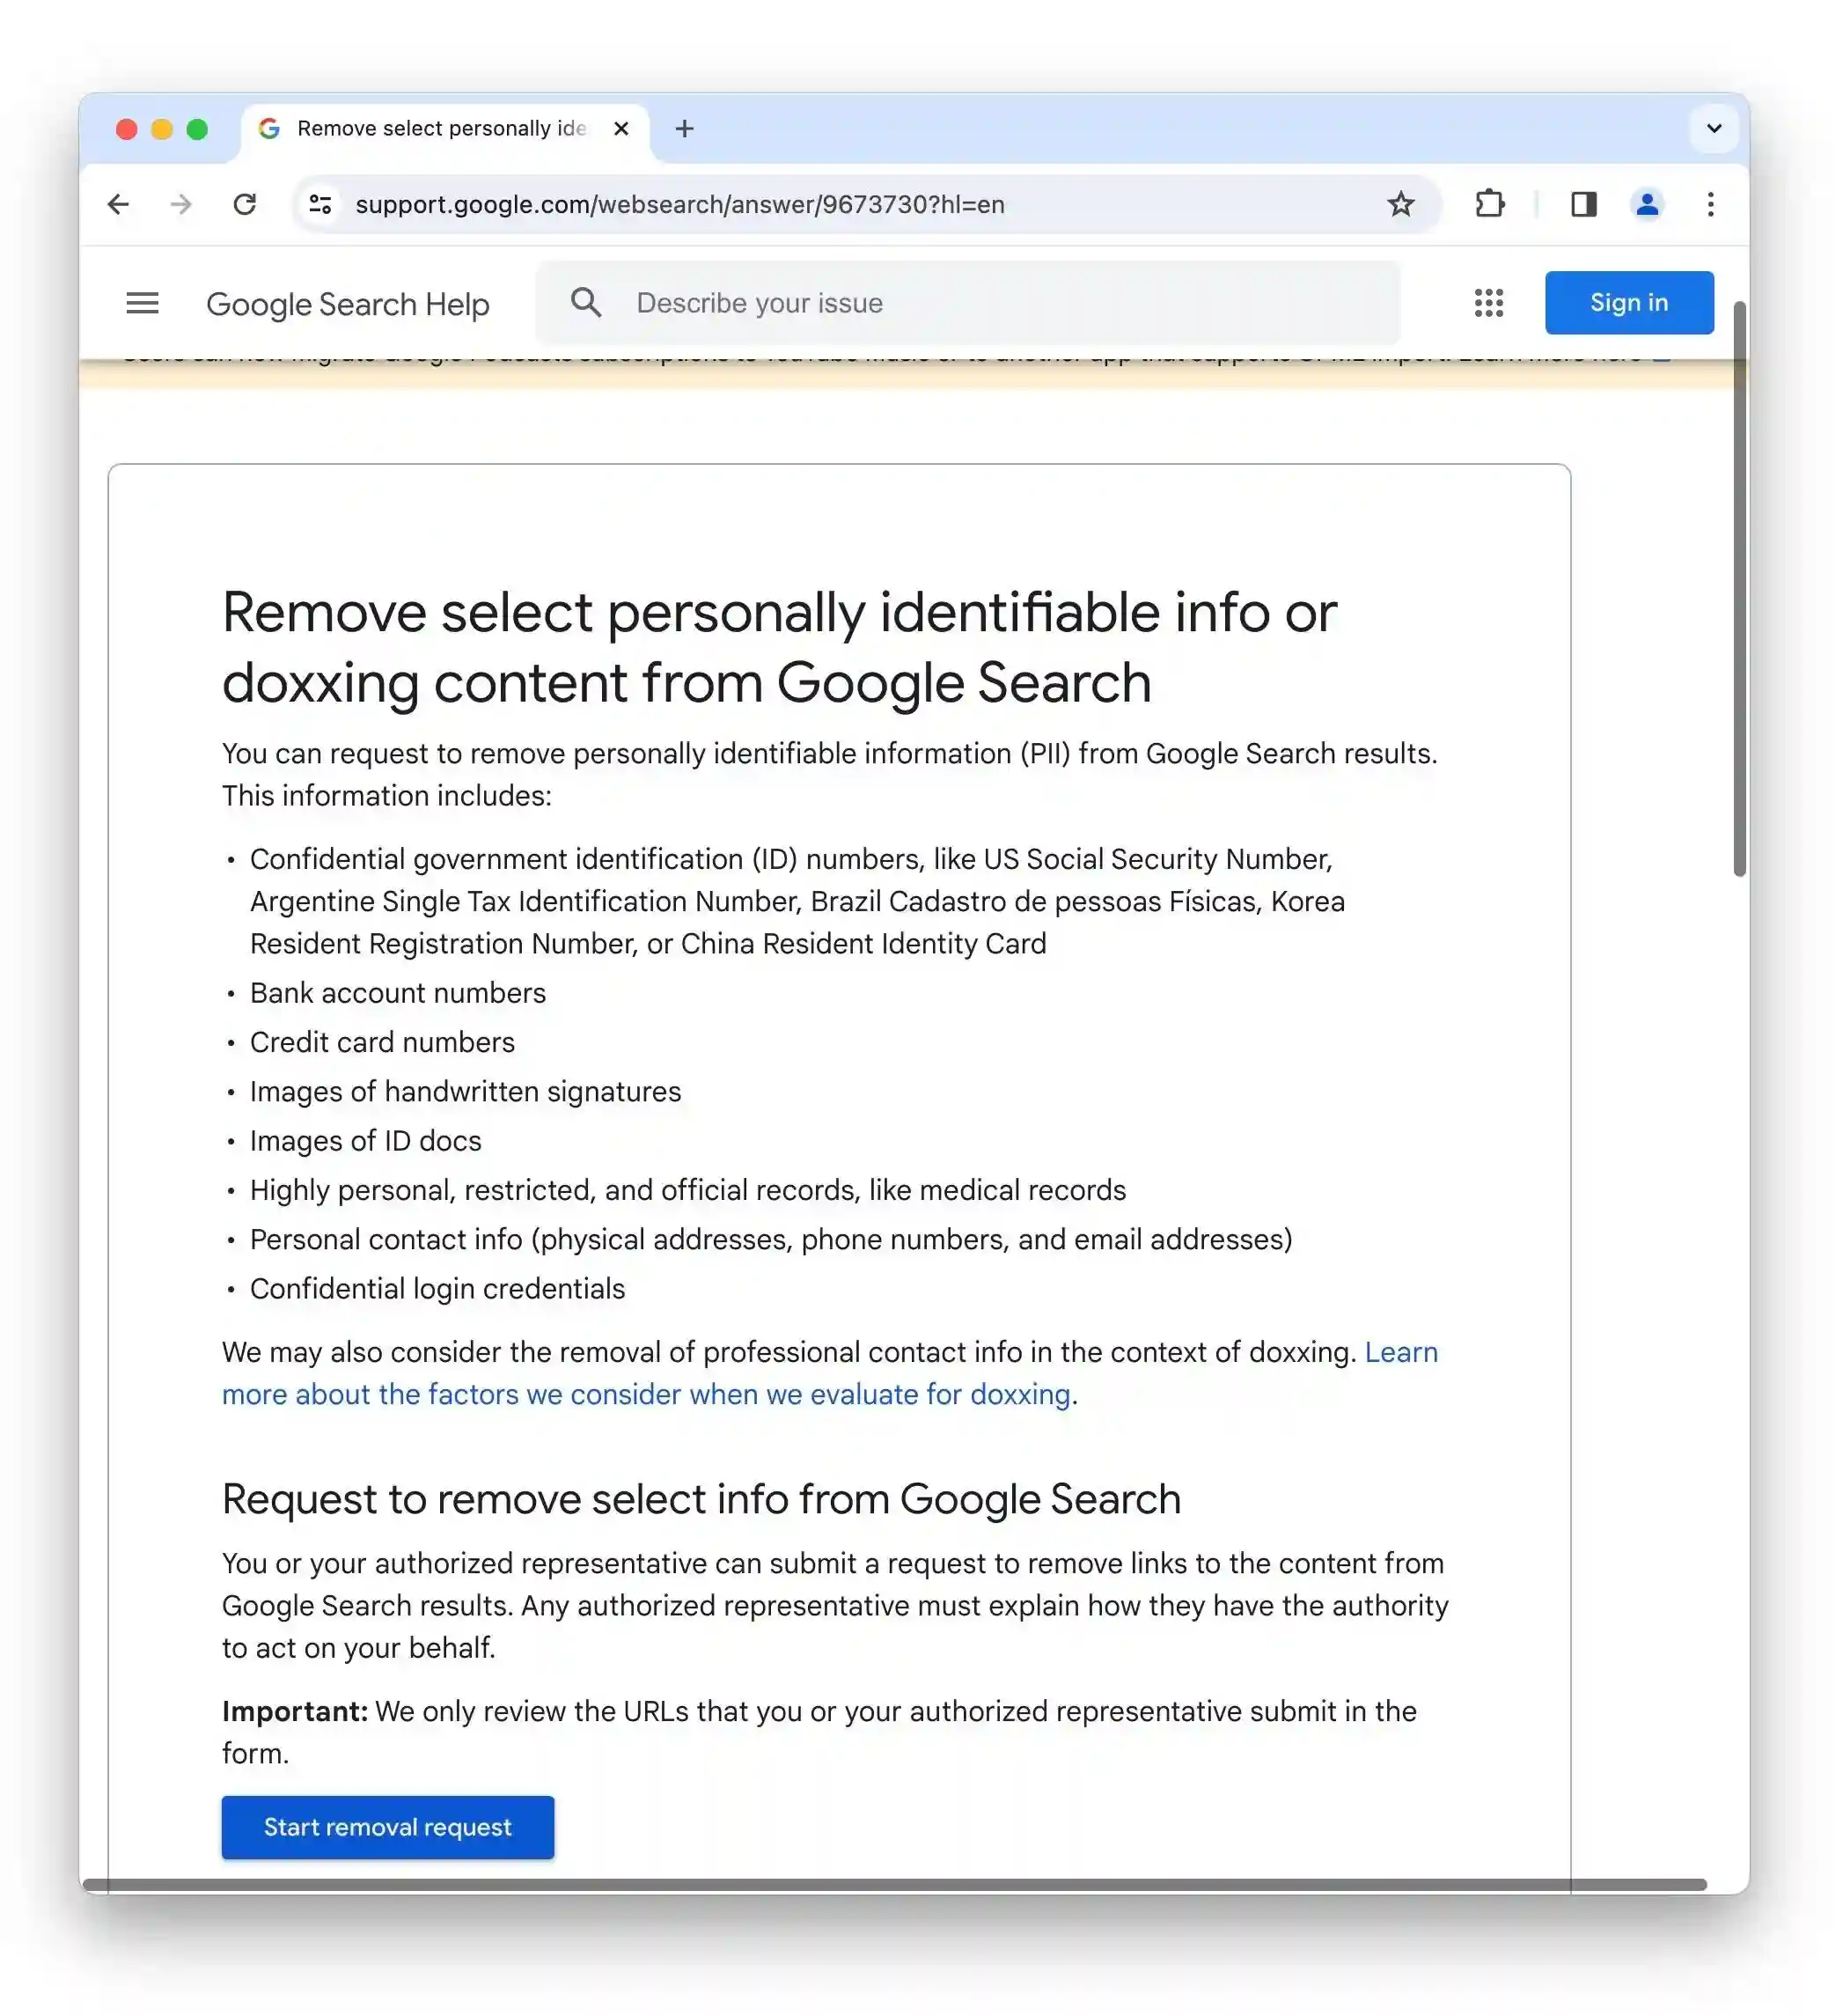 A form explaining how to remove personally identifiable information from Google Search